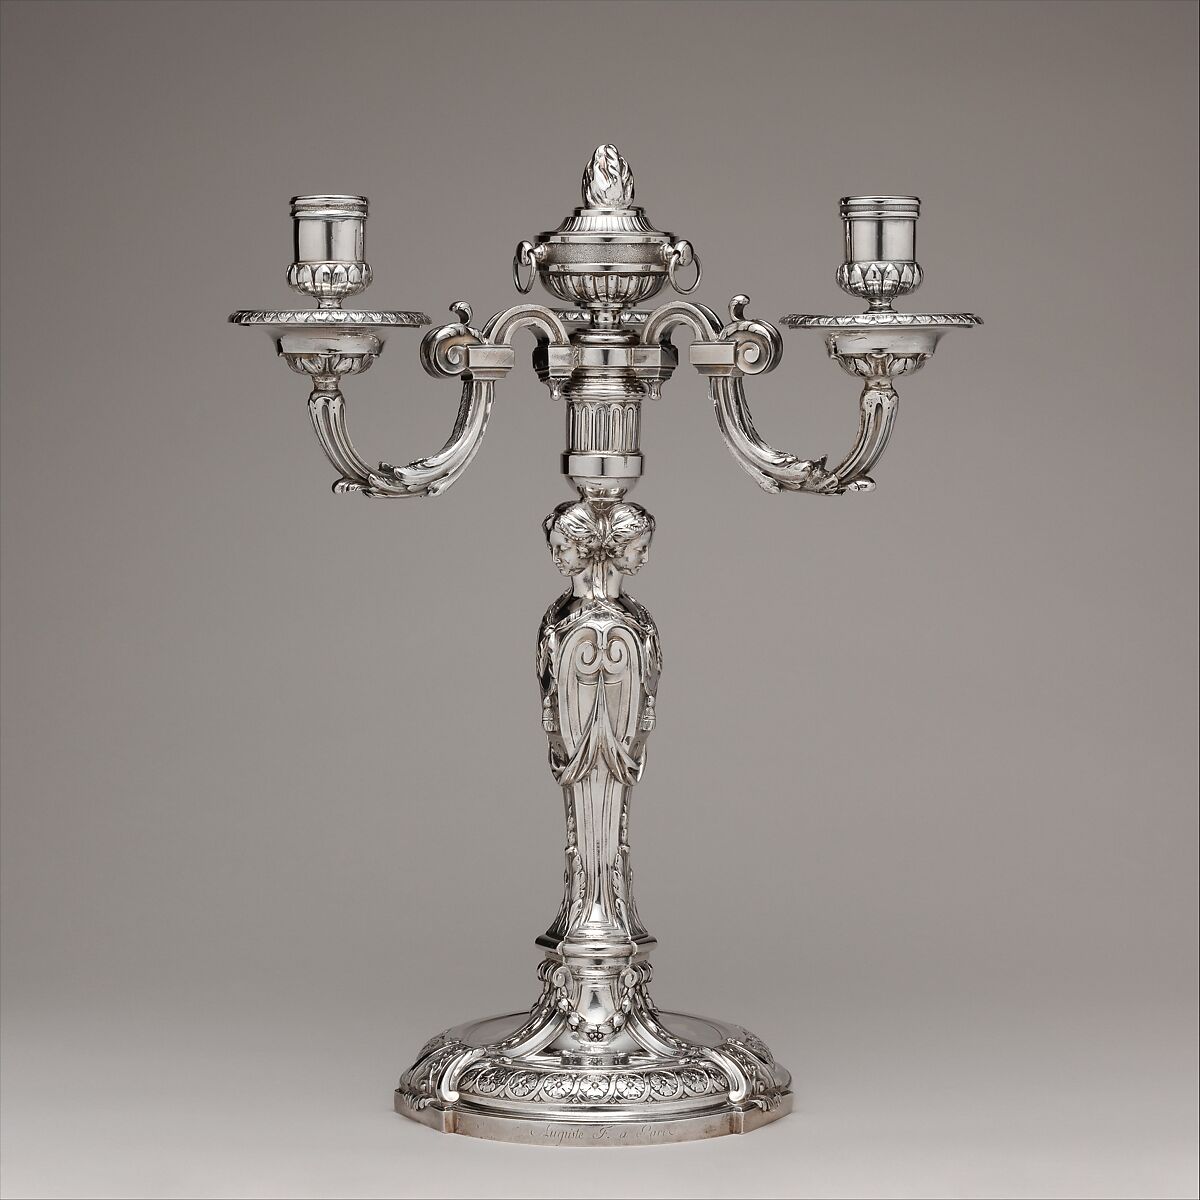 Candelabrum (one of a pair), Robert Joseph Auguste (French, 1723–1805, master 1757), Silver, French, Paris 